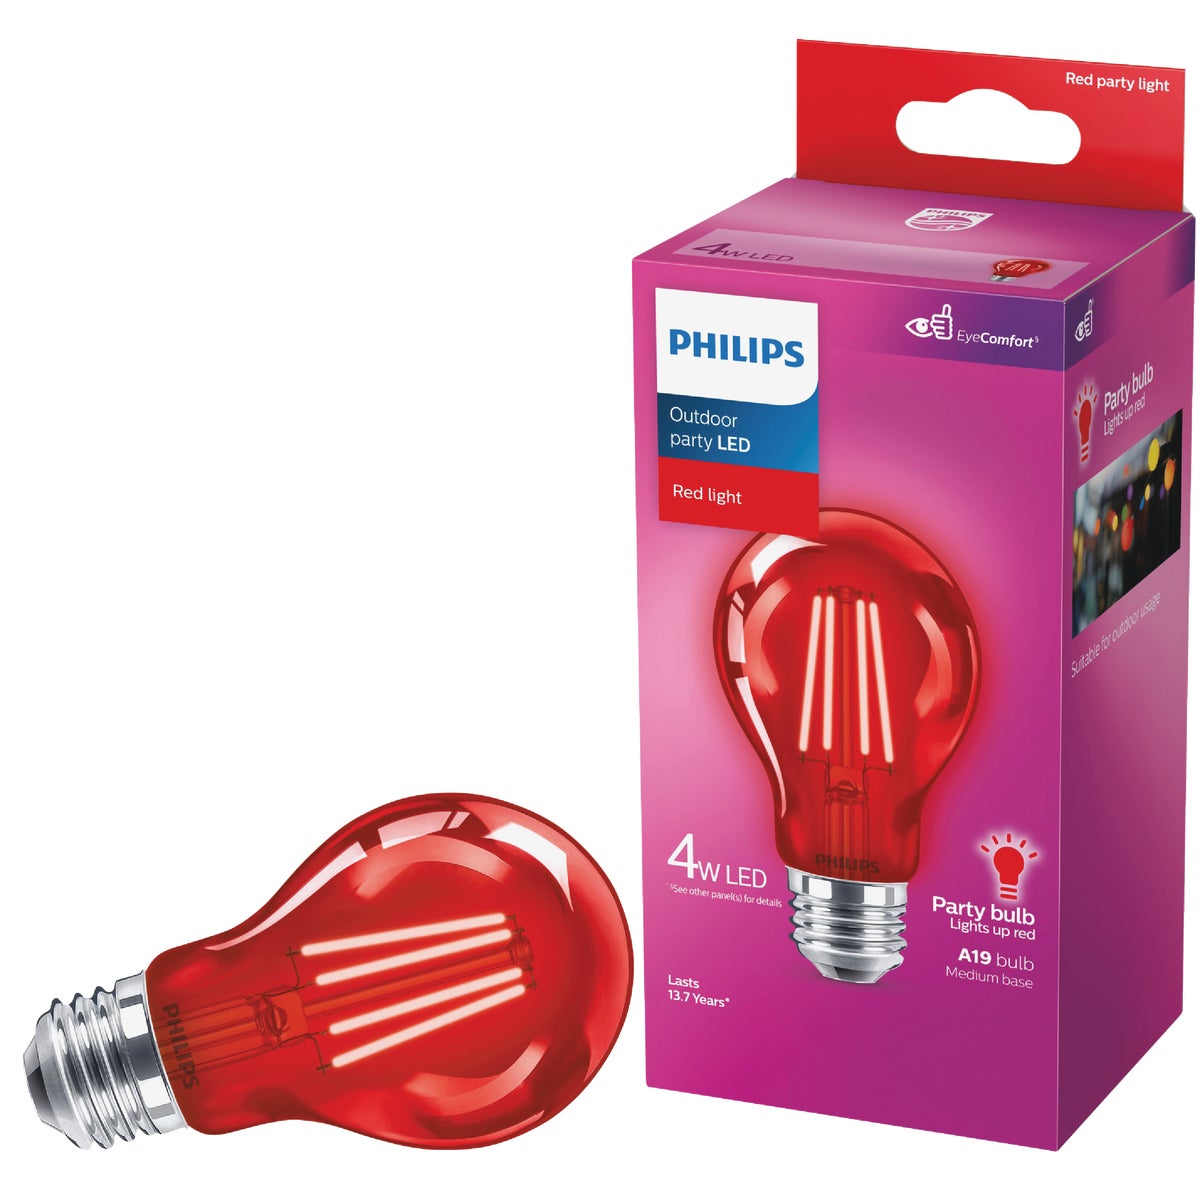 Item 535300, LED (light emitting diode) party bulb ideal for special occasions, holidays